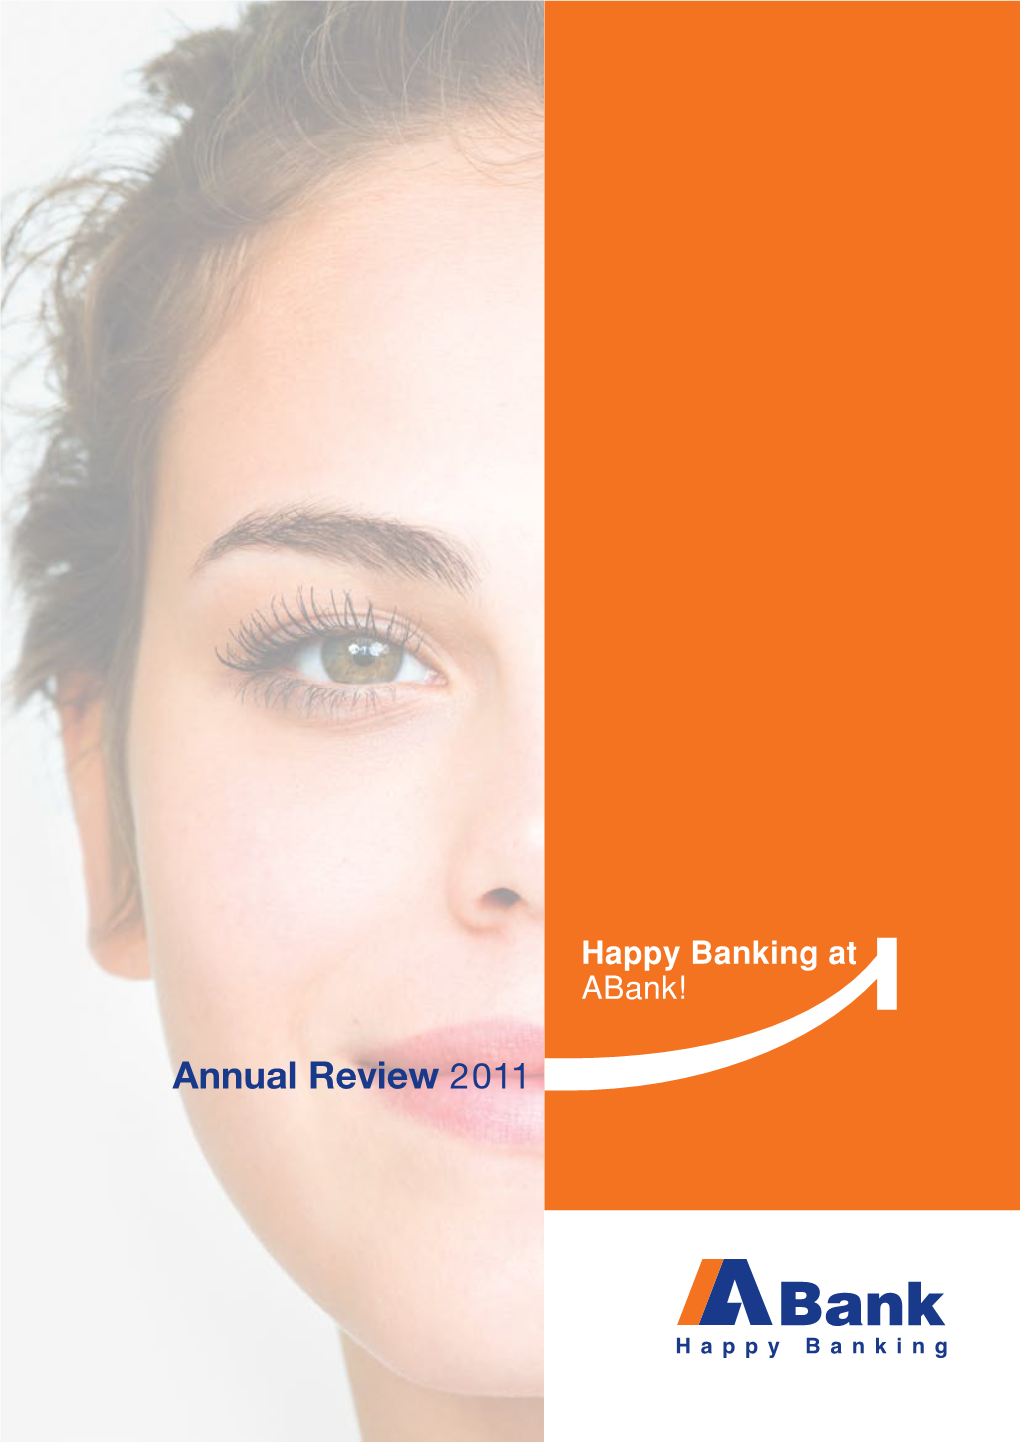 Annual Review 2011 Contents